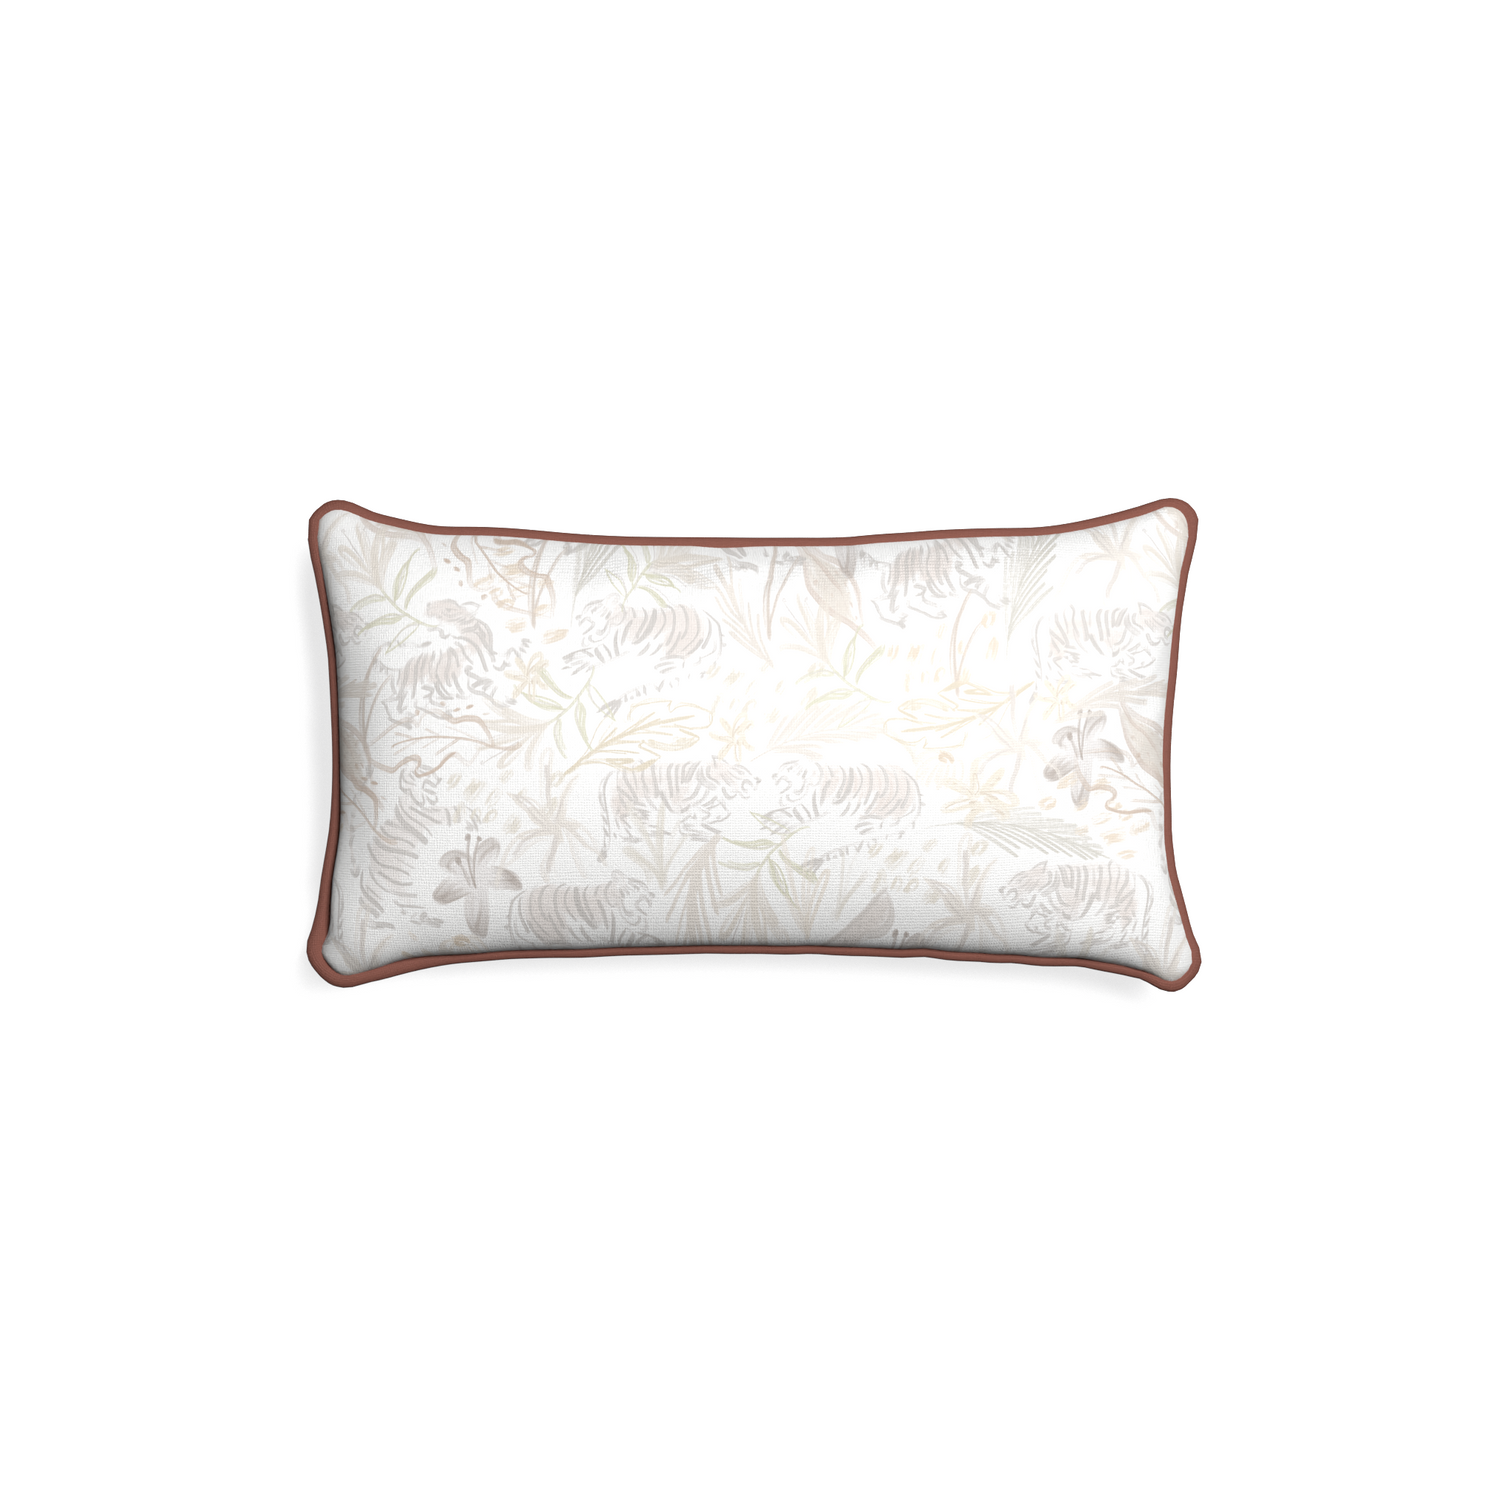 Petite-lumbar frida sand custom beige chinoiserie tigerpillow with w piping on white background